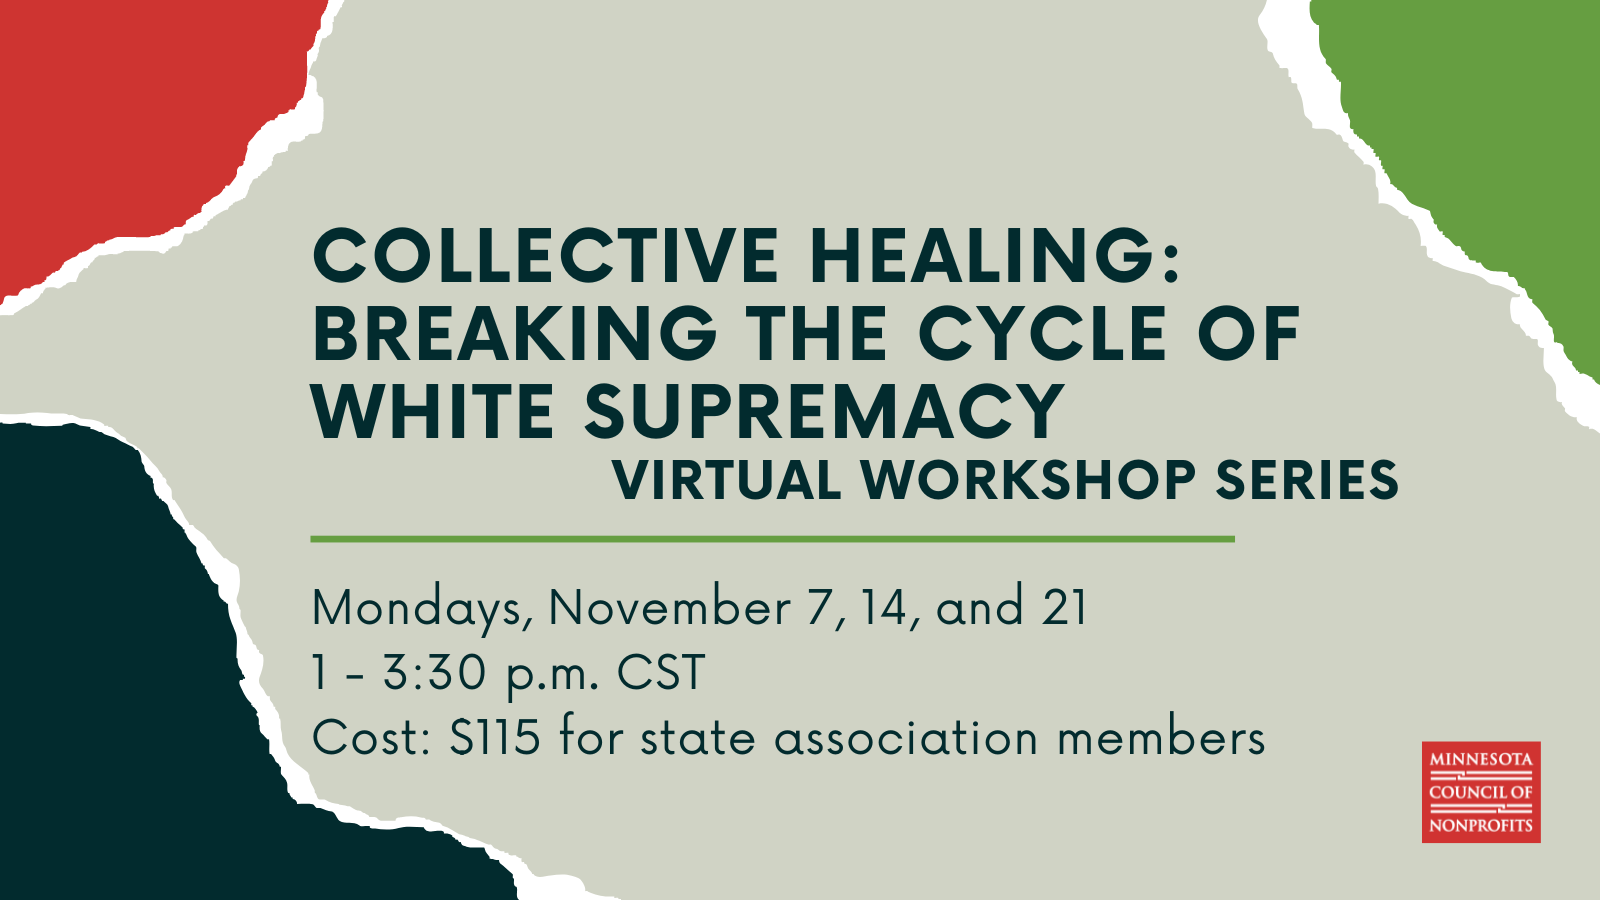 Collective Healing: Breaking the Cycle of White Supremacy